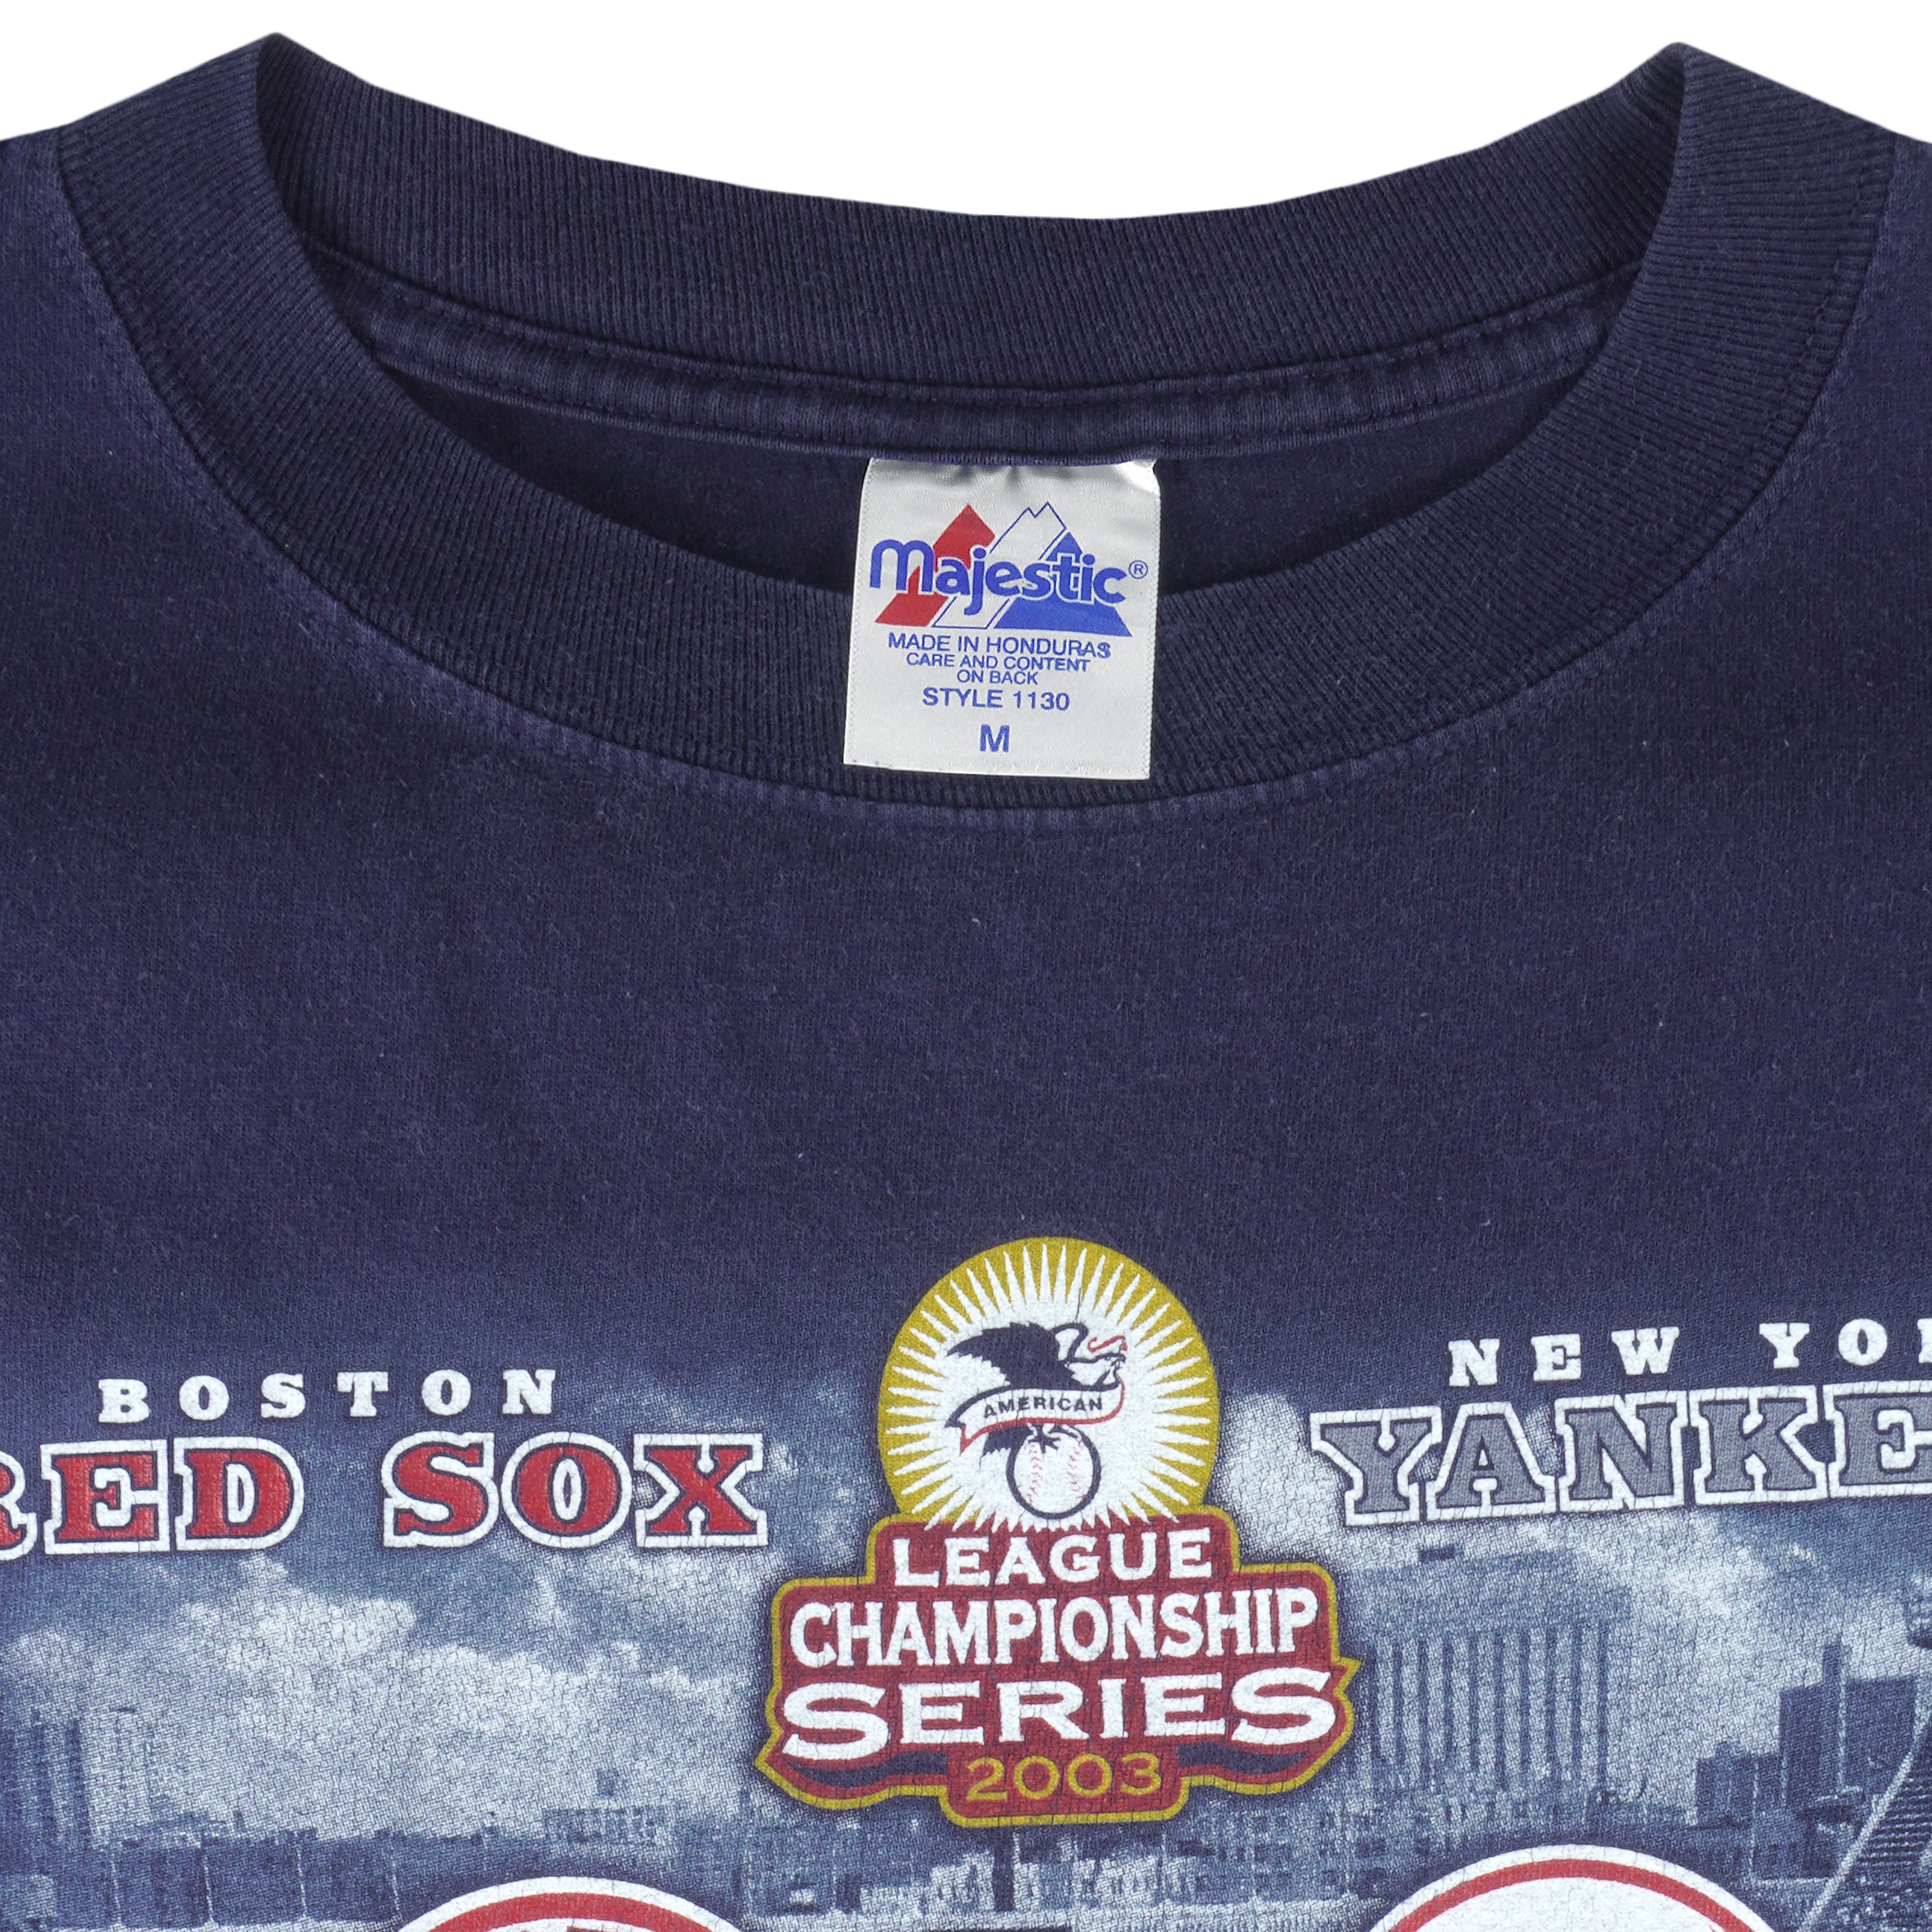 Collectible New York Yankees Jerseys for sale near Cleveland, Ohio